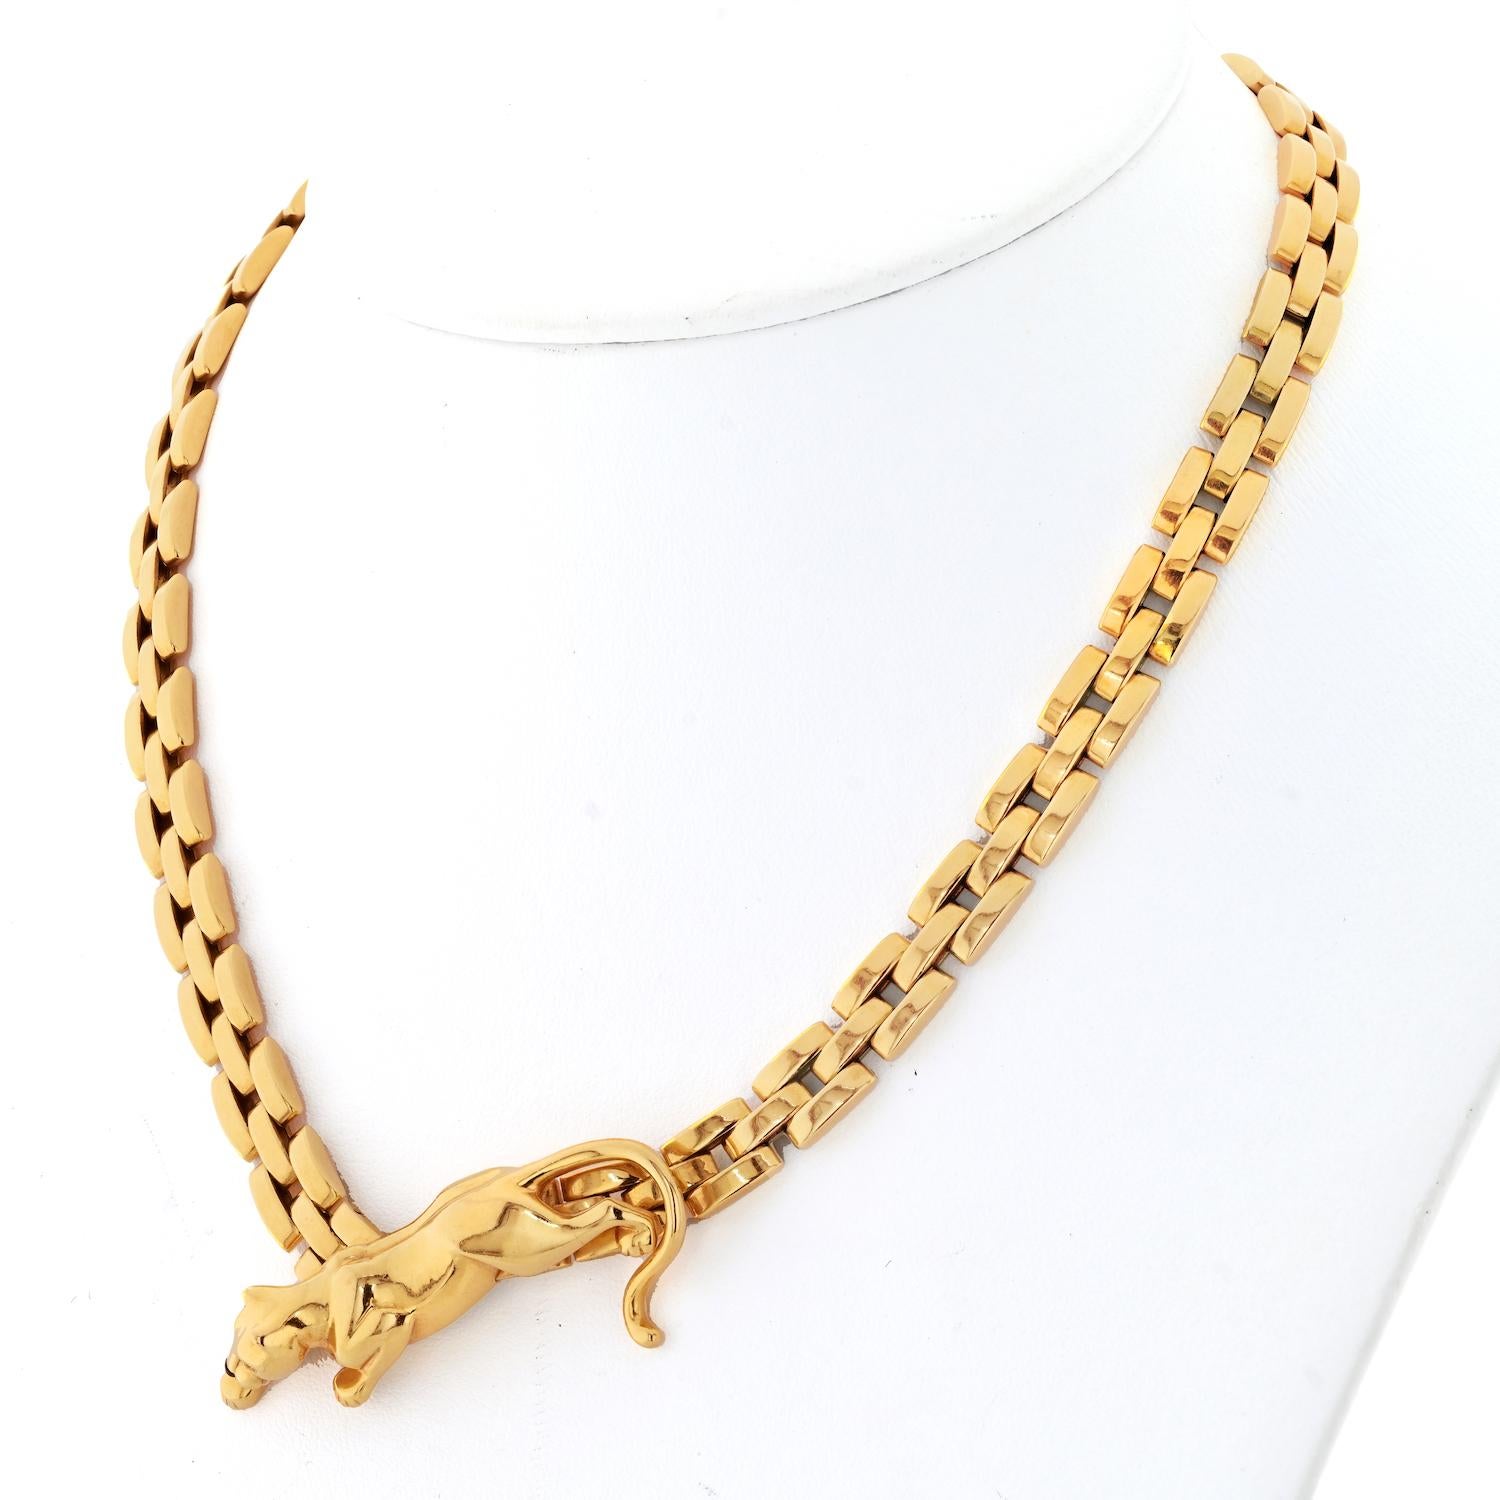 Cartier 18K Yellow Gold Maillon Panthere Link Chain Vintage Necklace In Excellent Condition For Sale In New York, NY